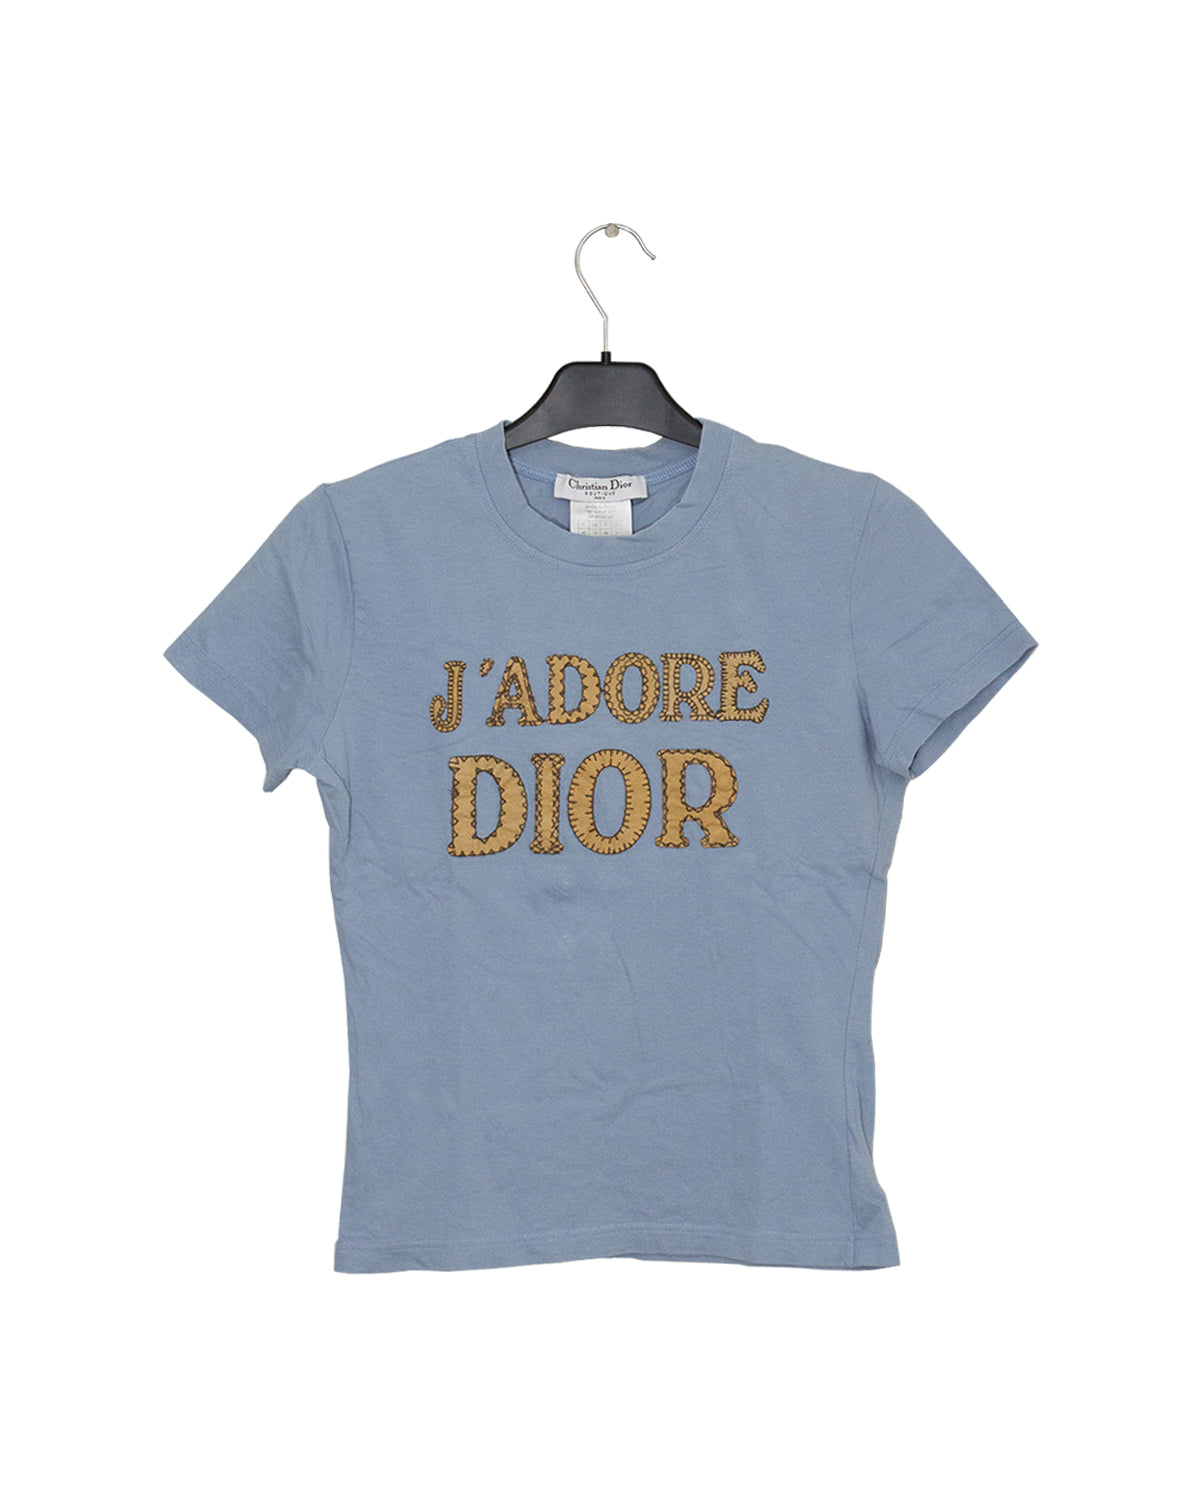 Vintage Dior J Adore Blue and Brown T Shirt